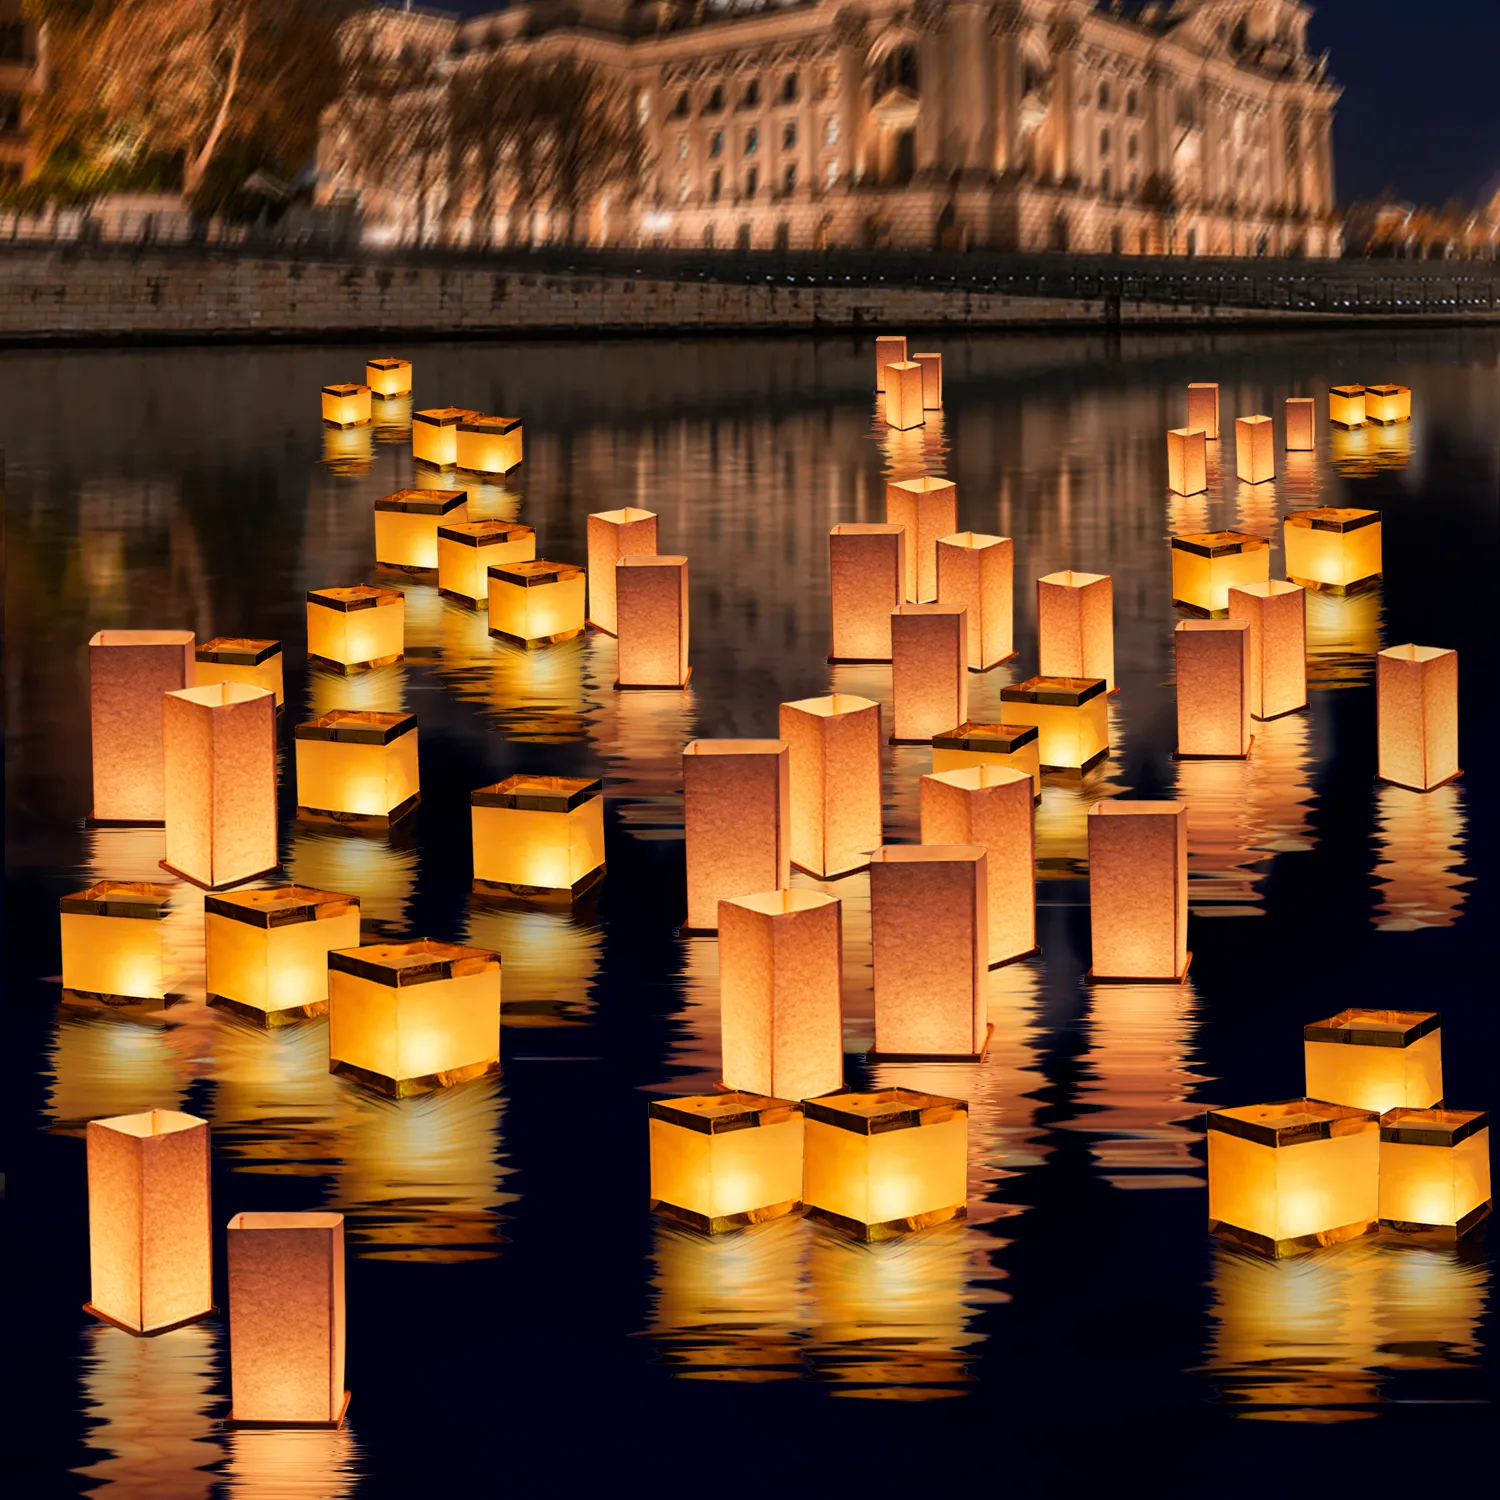 FUELYE Floating Lanterns Square Rectangle Sets,Outdoor Decorative with Waterproof,Floating Candles for Pool,Rive,Memorials,Wedding,Bar,and Parties